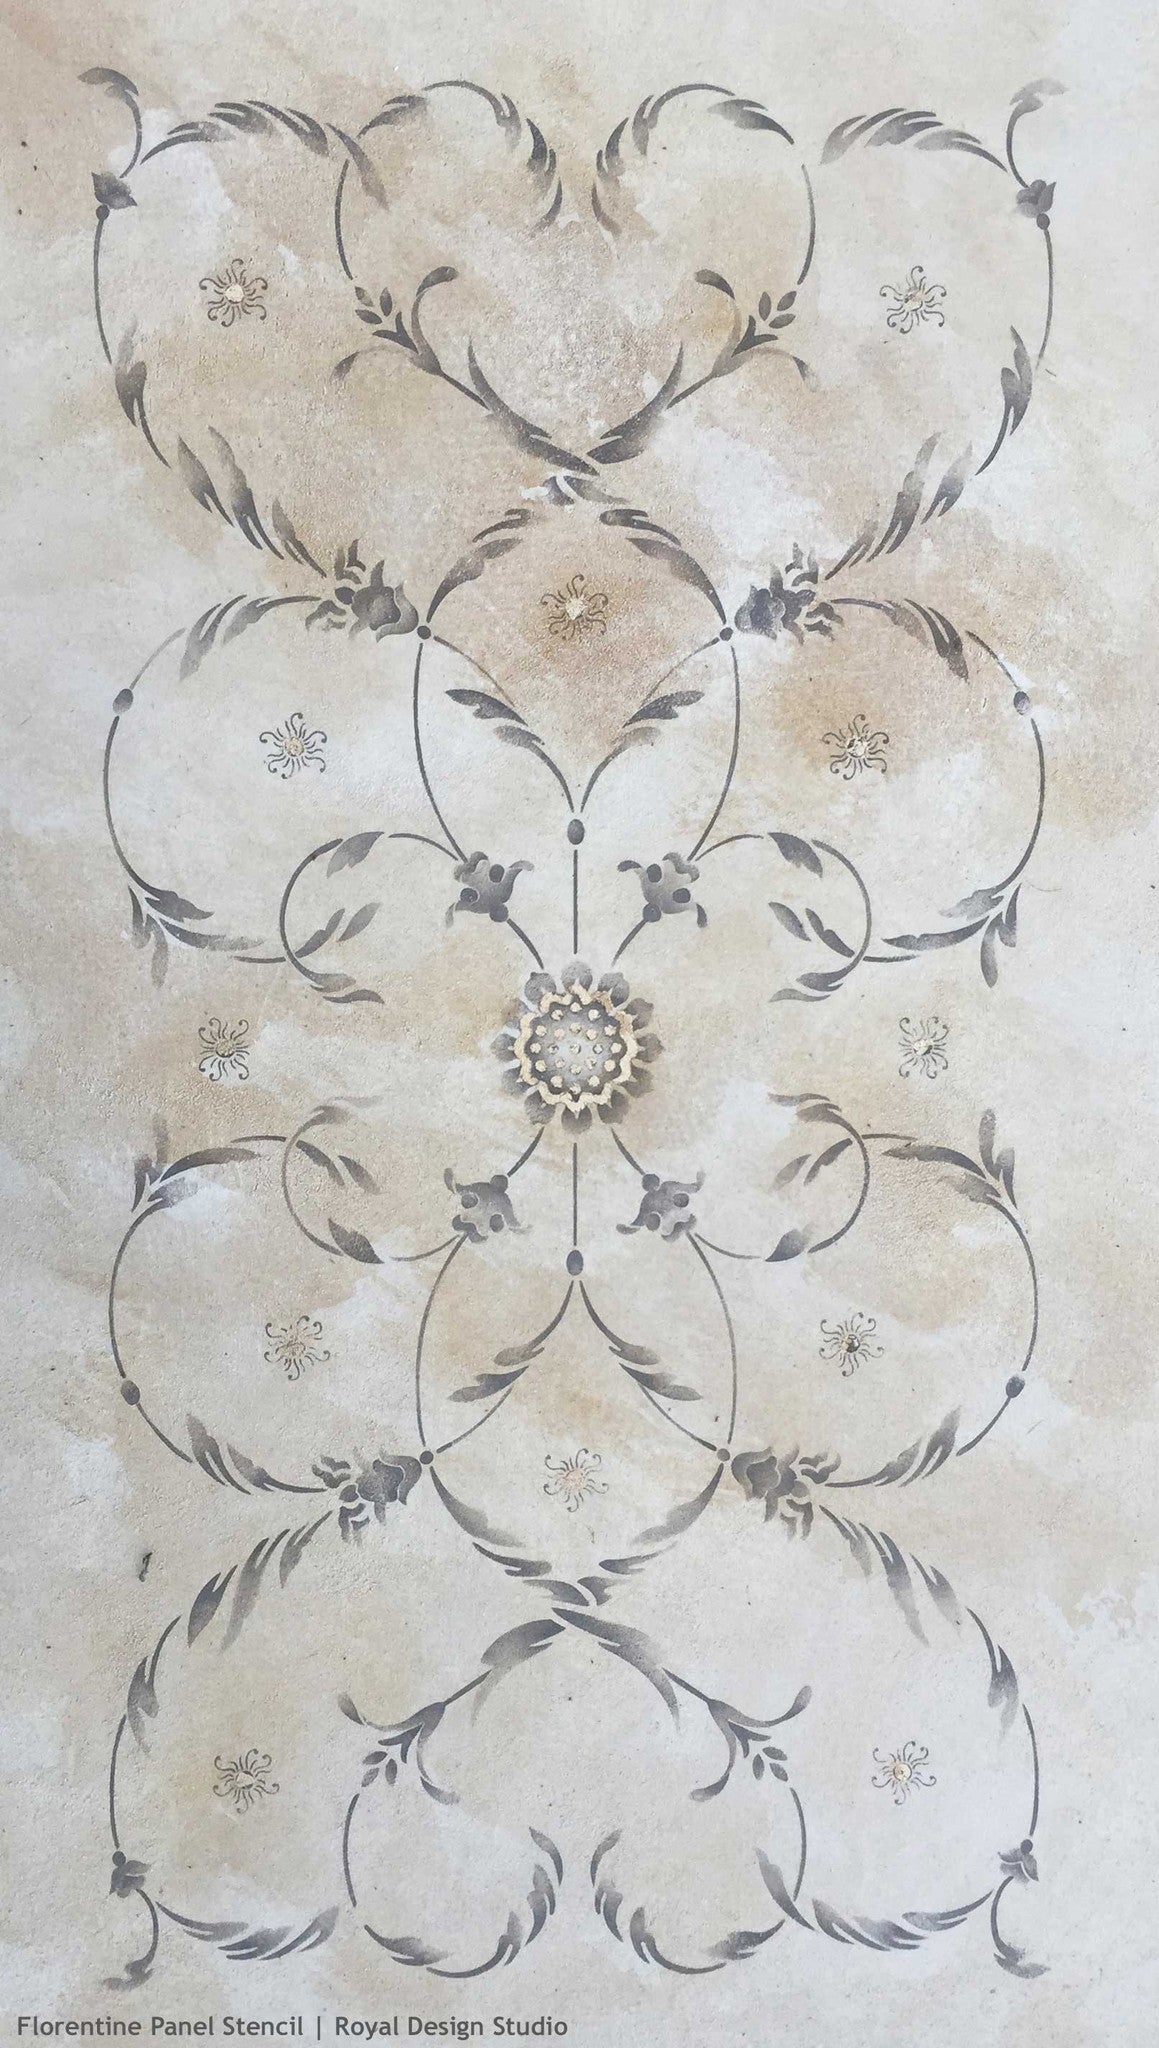 Painting Decorative Finishes on Italian Decor with Furniture Stencils - Royal Design Studio